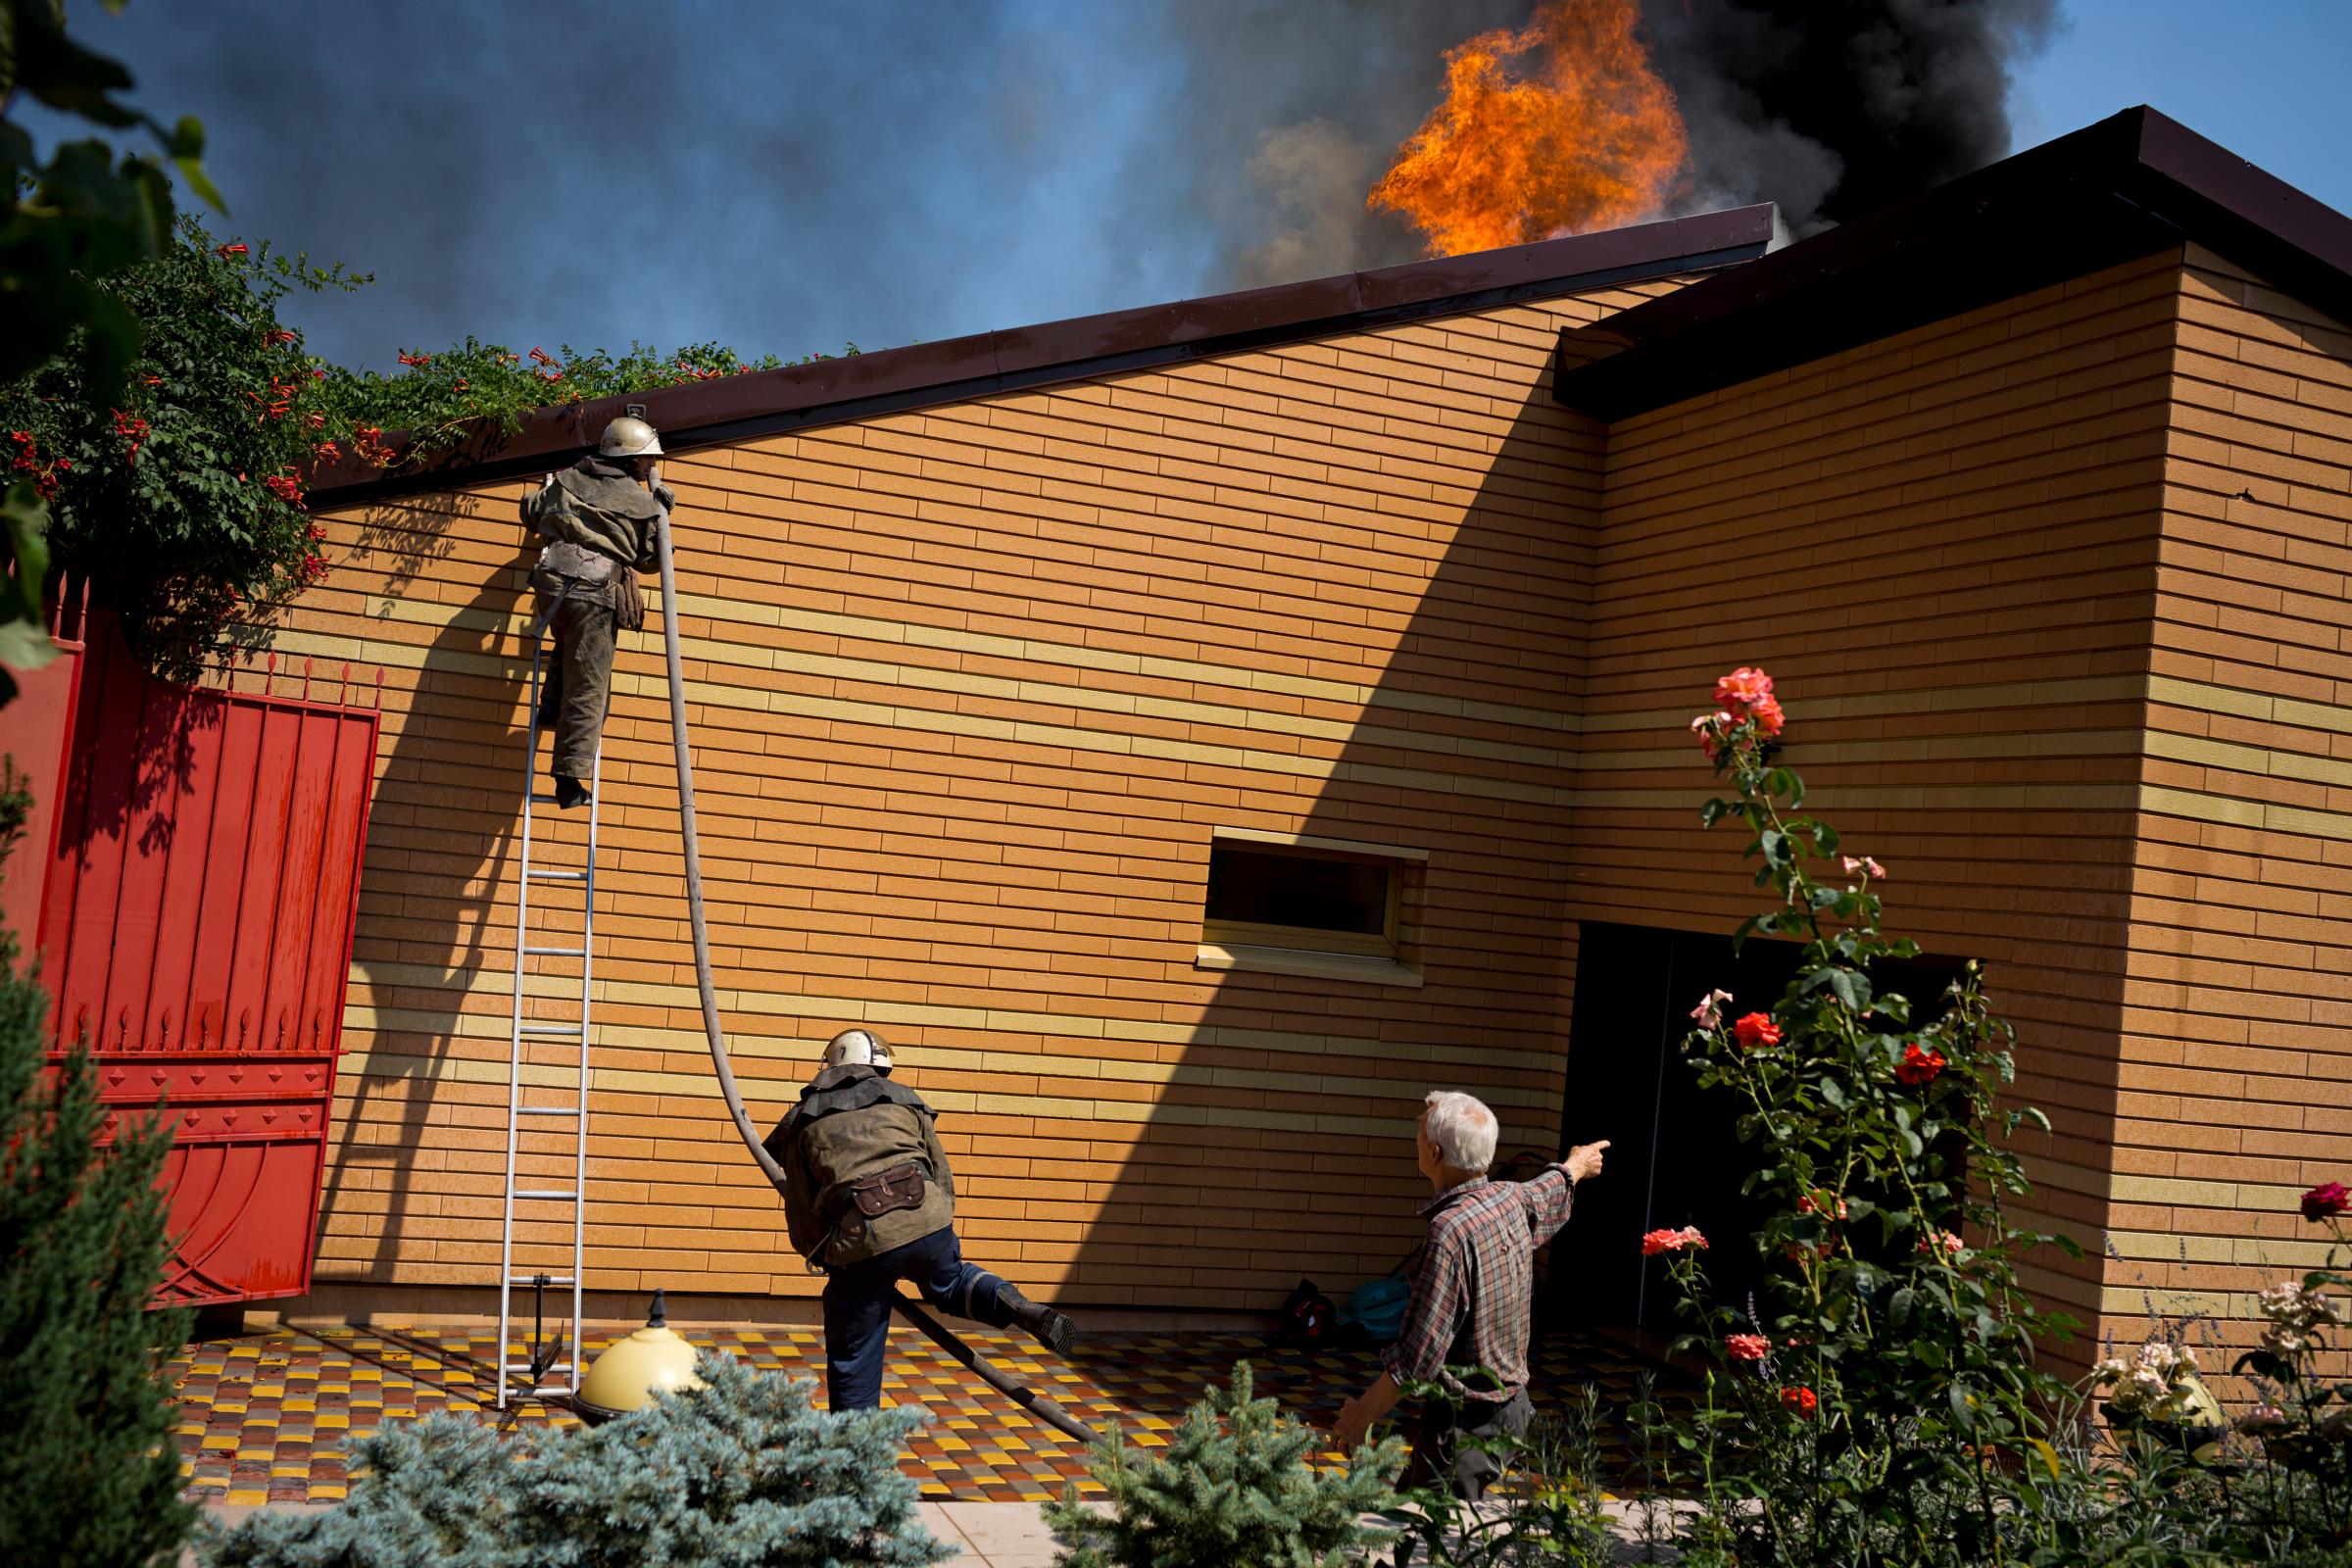 Firemen try to put out a fire in Voroshyloskyi, a residential area of Donetsk, after it was hit by artillery shelling on August 14, 2014 in Ukraine.